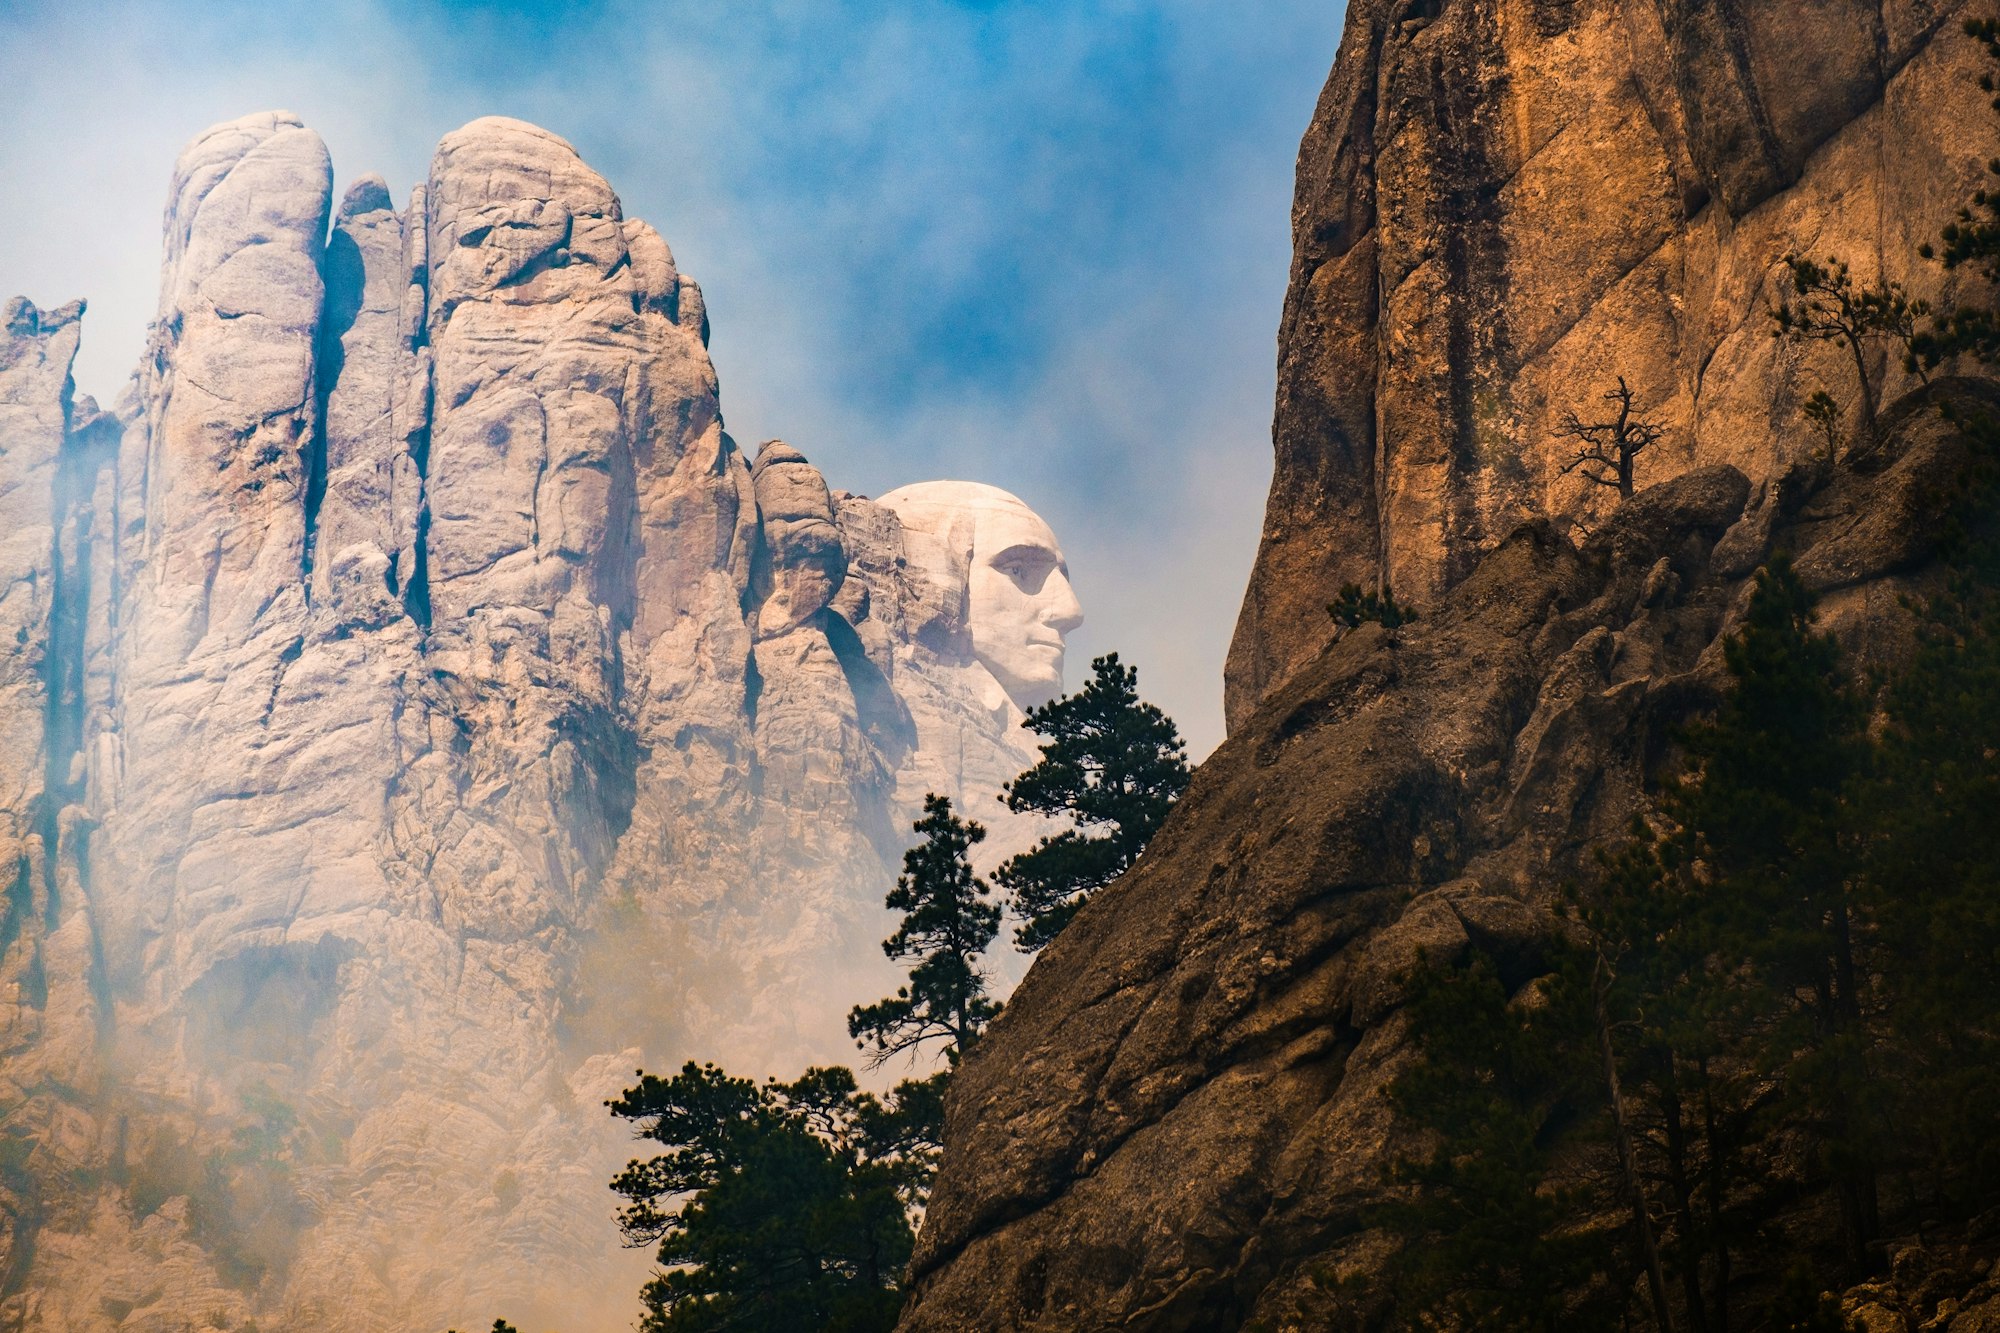 How Many Presidents Are Depicted On Mount Rushmore?